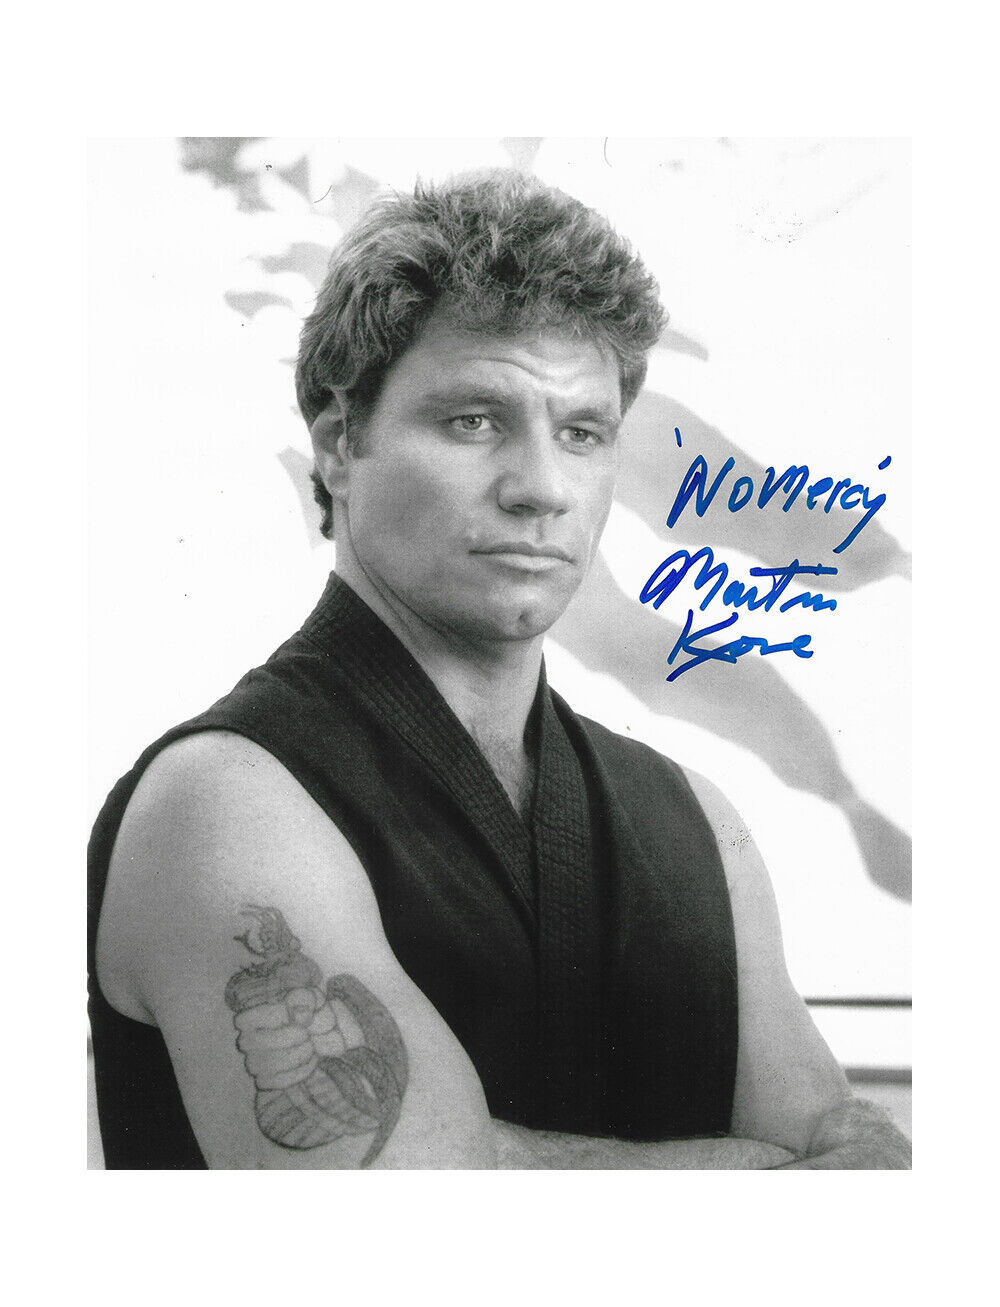 8x10 Karate Kid Print Signed by Martin Kove 100% Authentic + COA